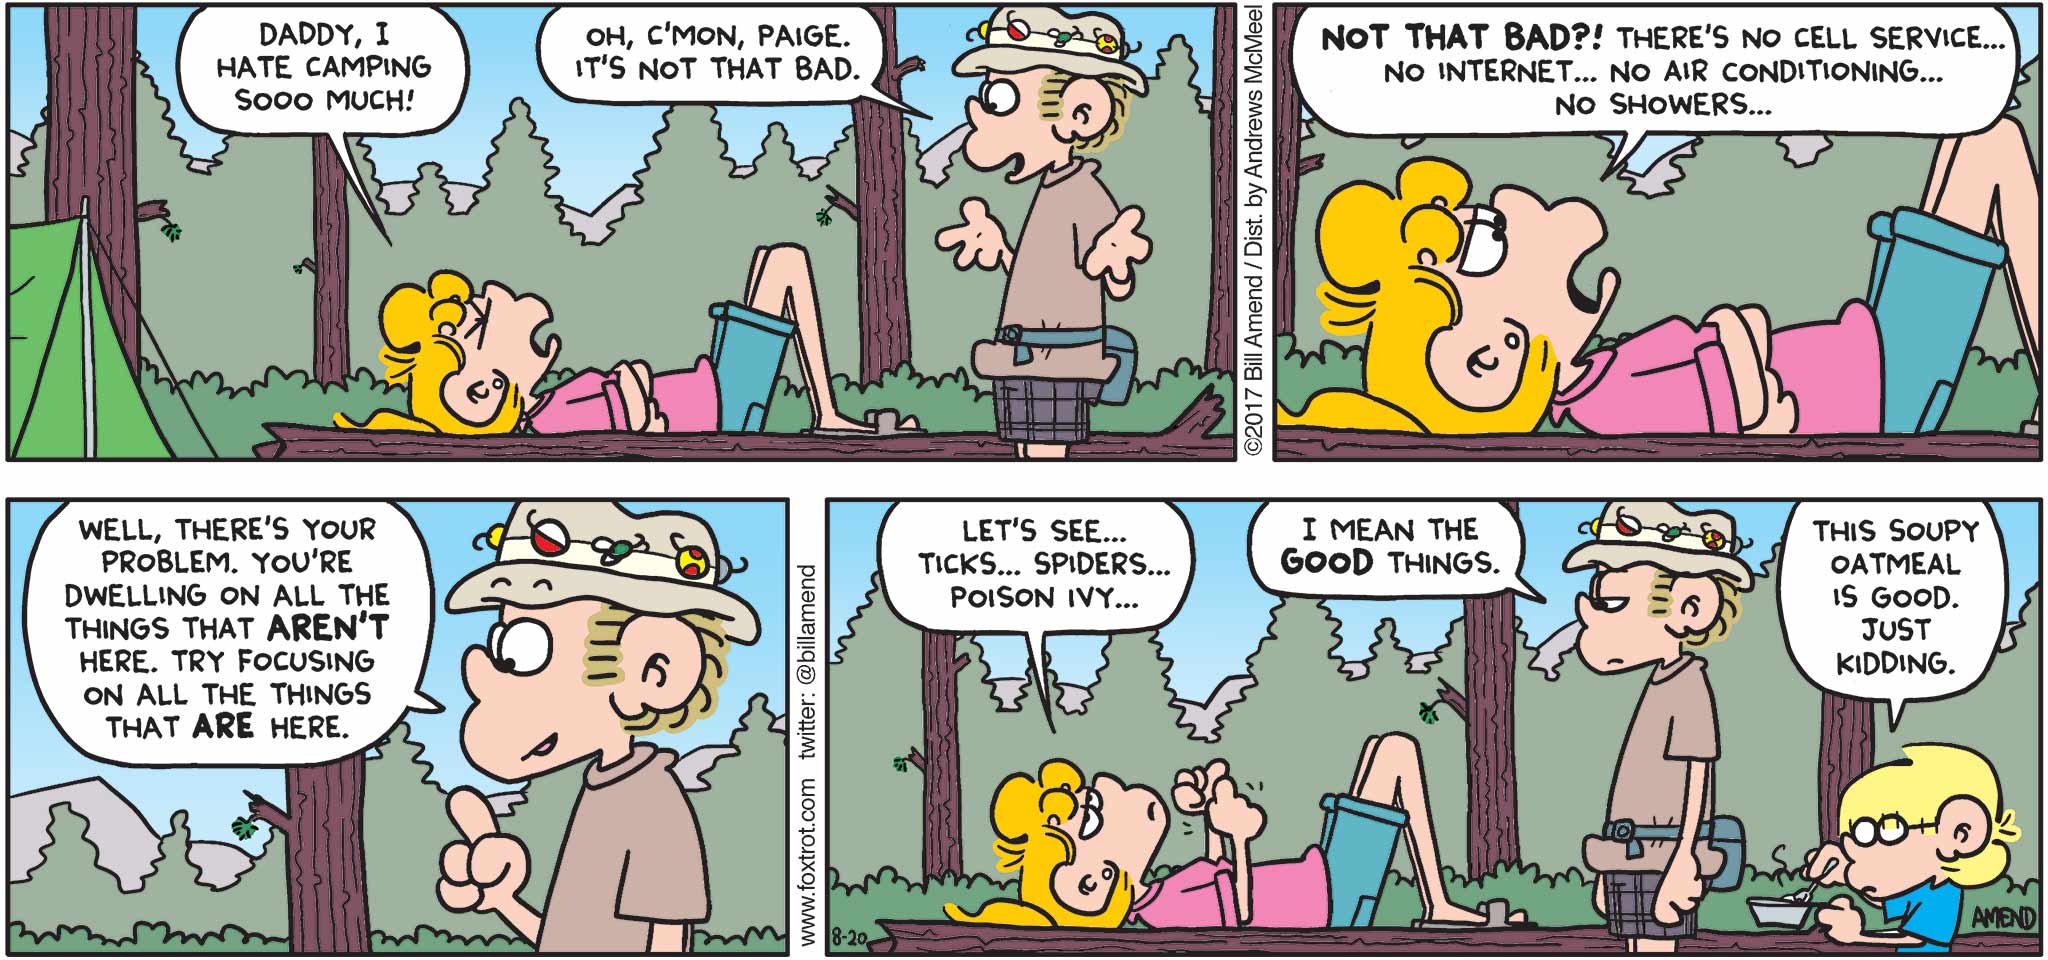 FoxTrot by Bill Amend - "Not That Bad" published August 20, 2017 - Paige says: Daddy, I hate camping sooo much! Roger says: Oh, c'mon, Paige. It's not that bad. Paige says: NOT THAT BAD?! There's not cell service... No Internet... No air conditioning... No showers... Roger says: Well, there's your problem. You're dwelling on all the thing that AREN'T here. Try focusing on all the thing that ARE here. Paige says: Let's see... ticks... spiders... poison ivy... Roger says: I mean the GOOD things. Jason says: This soupy oatmeal is good. Just kidding.